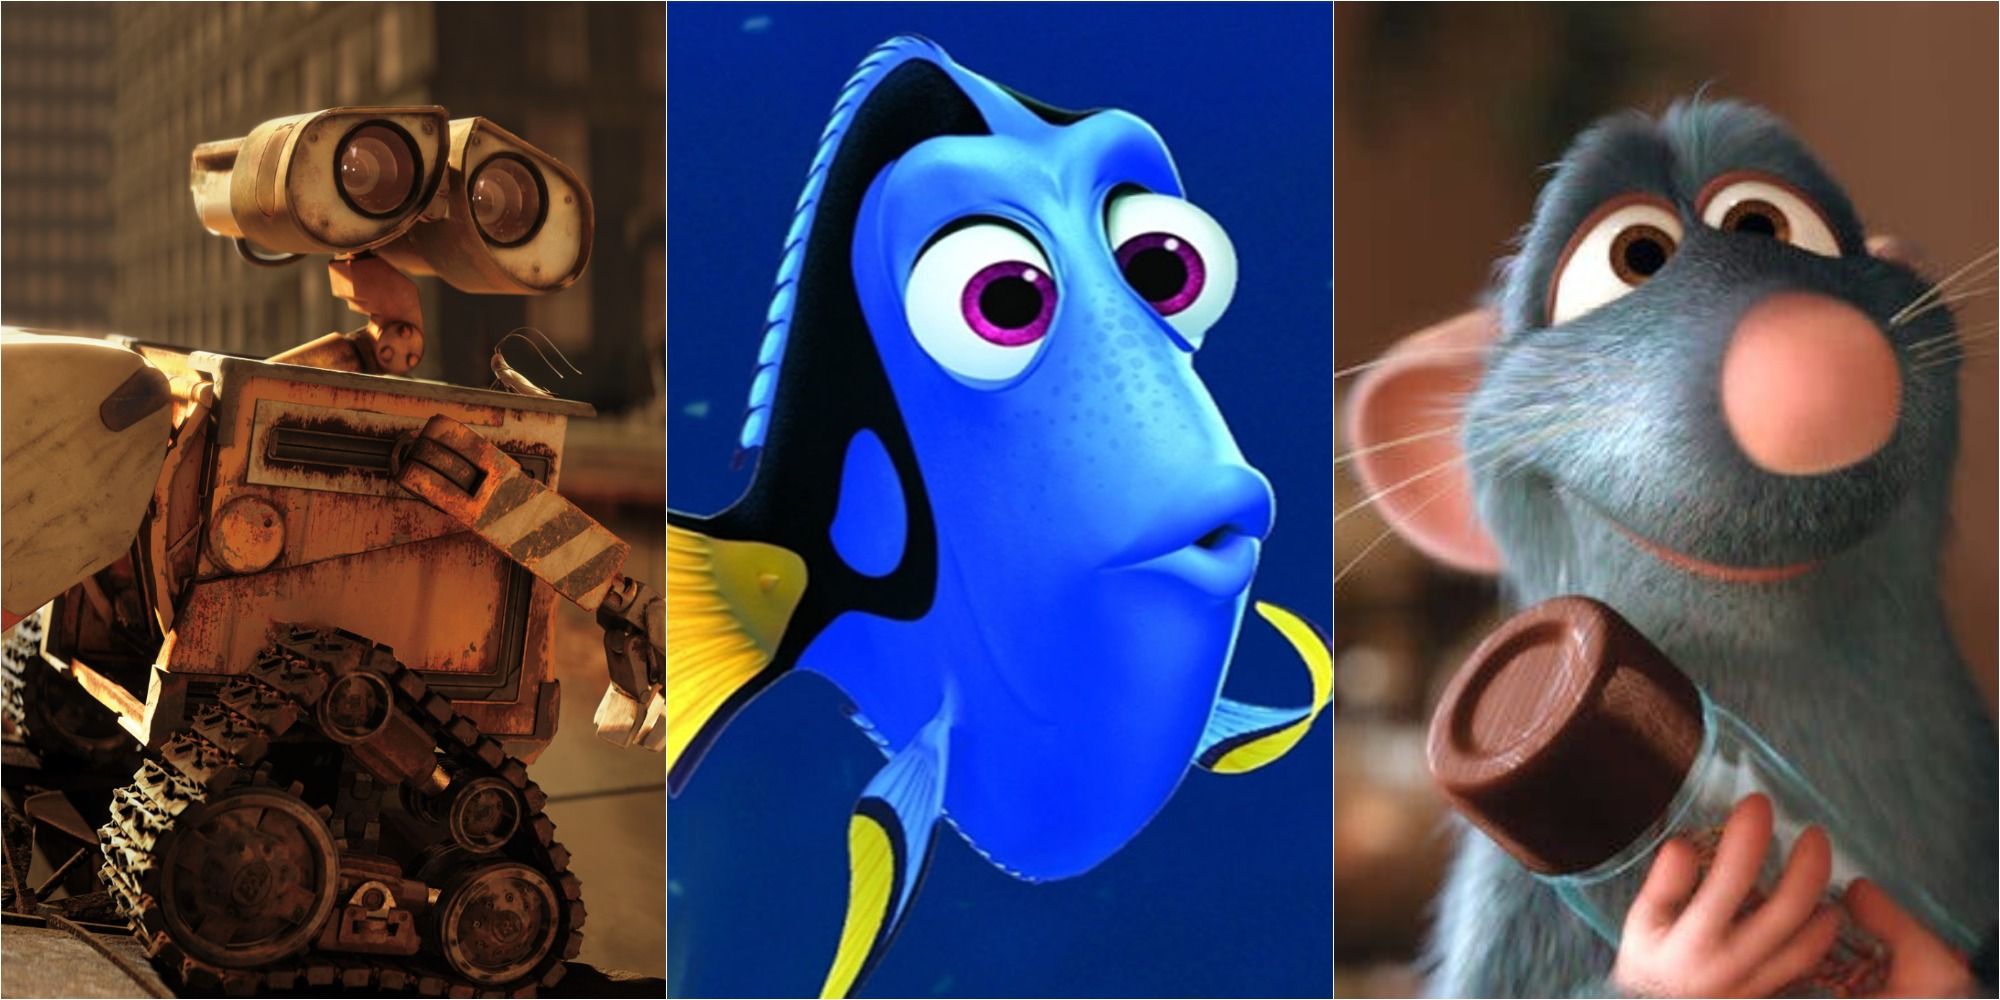 Best Pixar Characters Of All Time According to Ranker